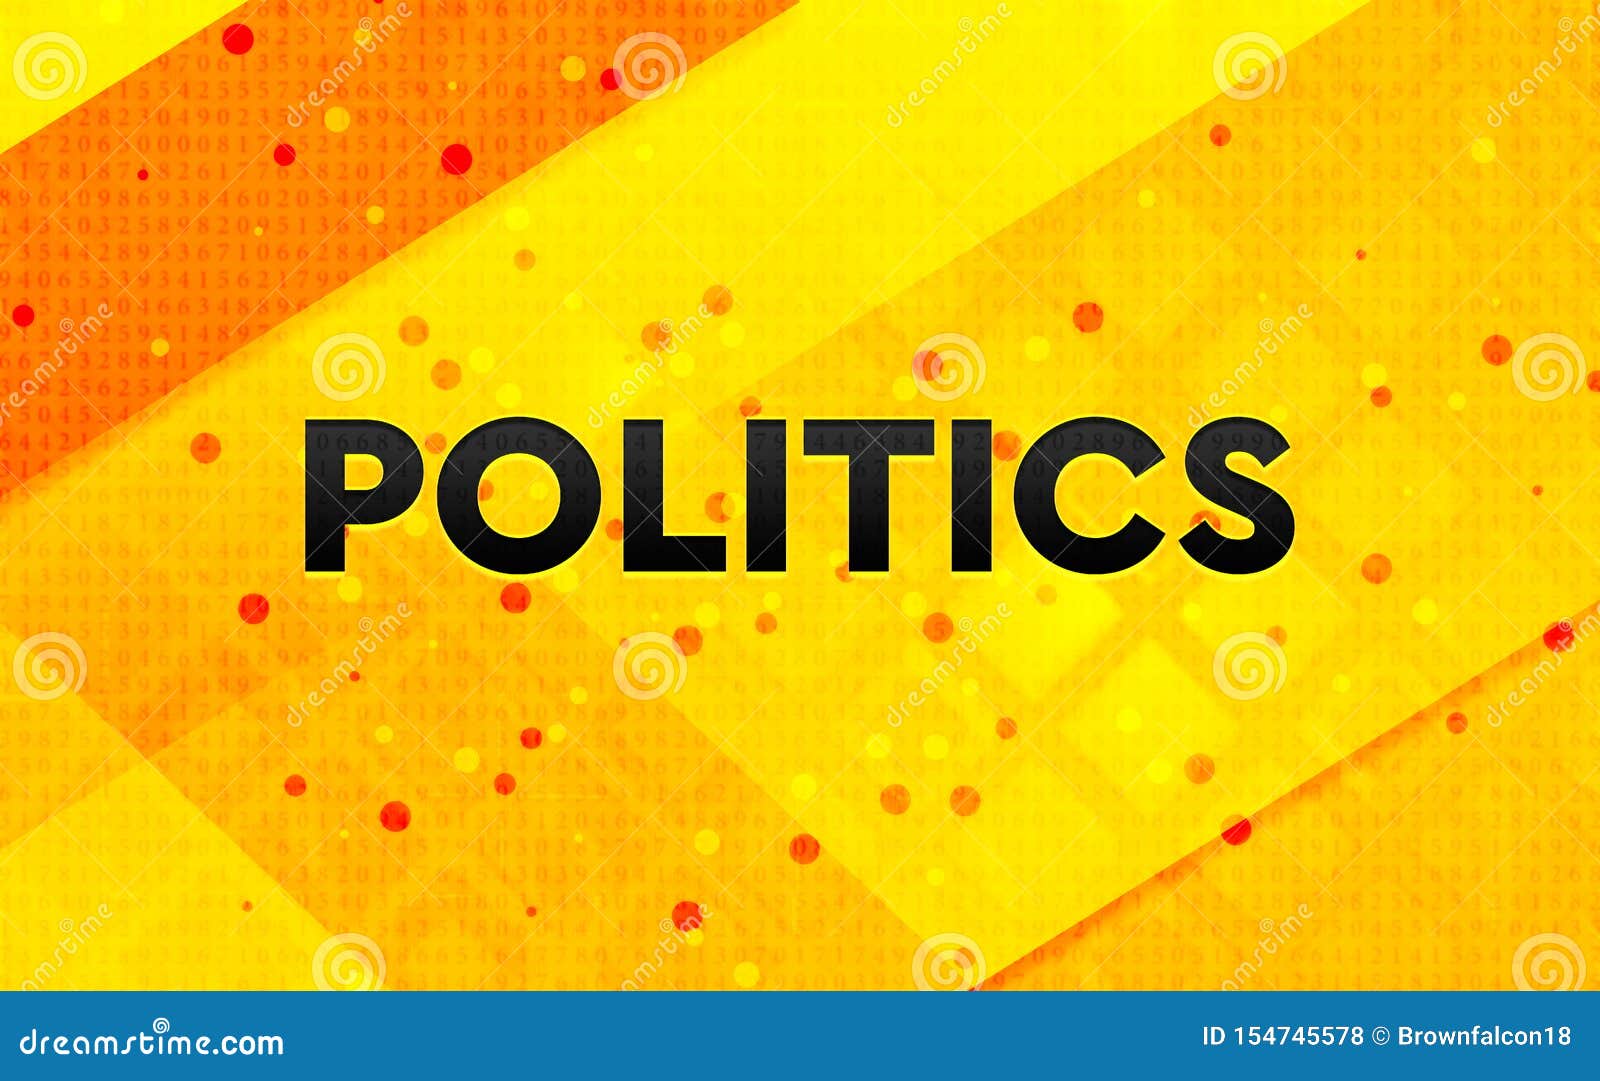 Politics Abstract Digital Banner Yellow Background Stock Illustration -  Illustration of text, political: 154745578